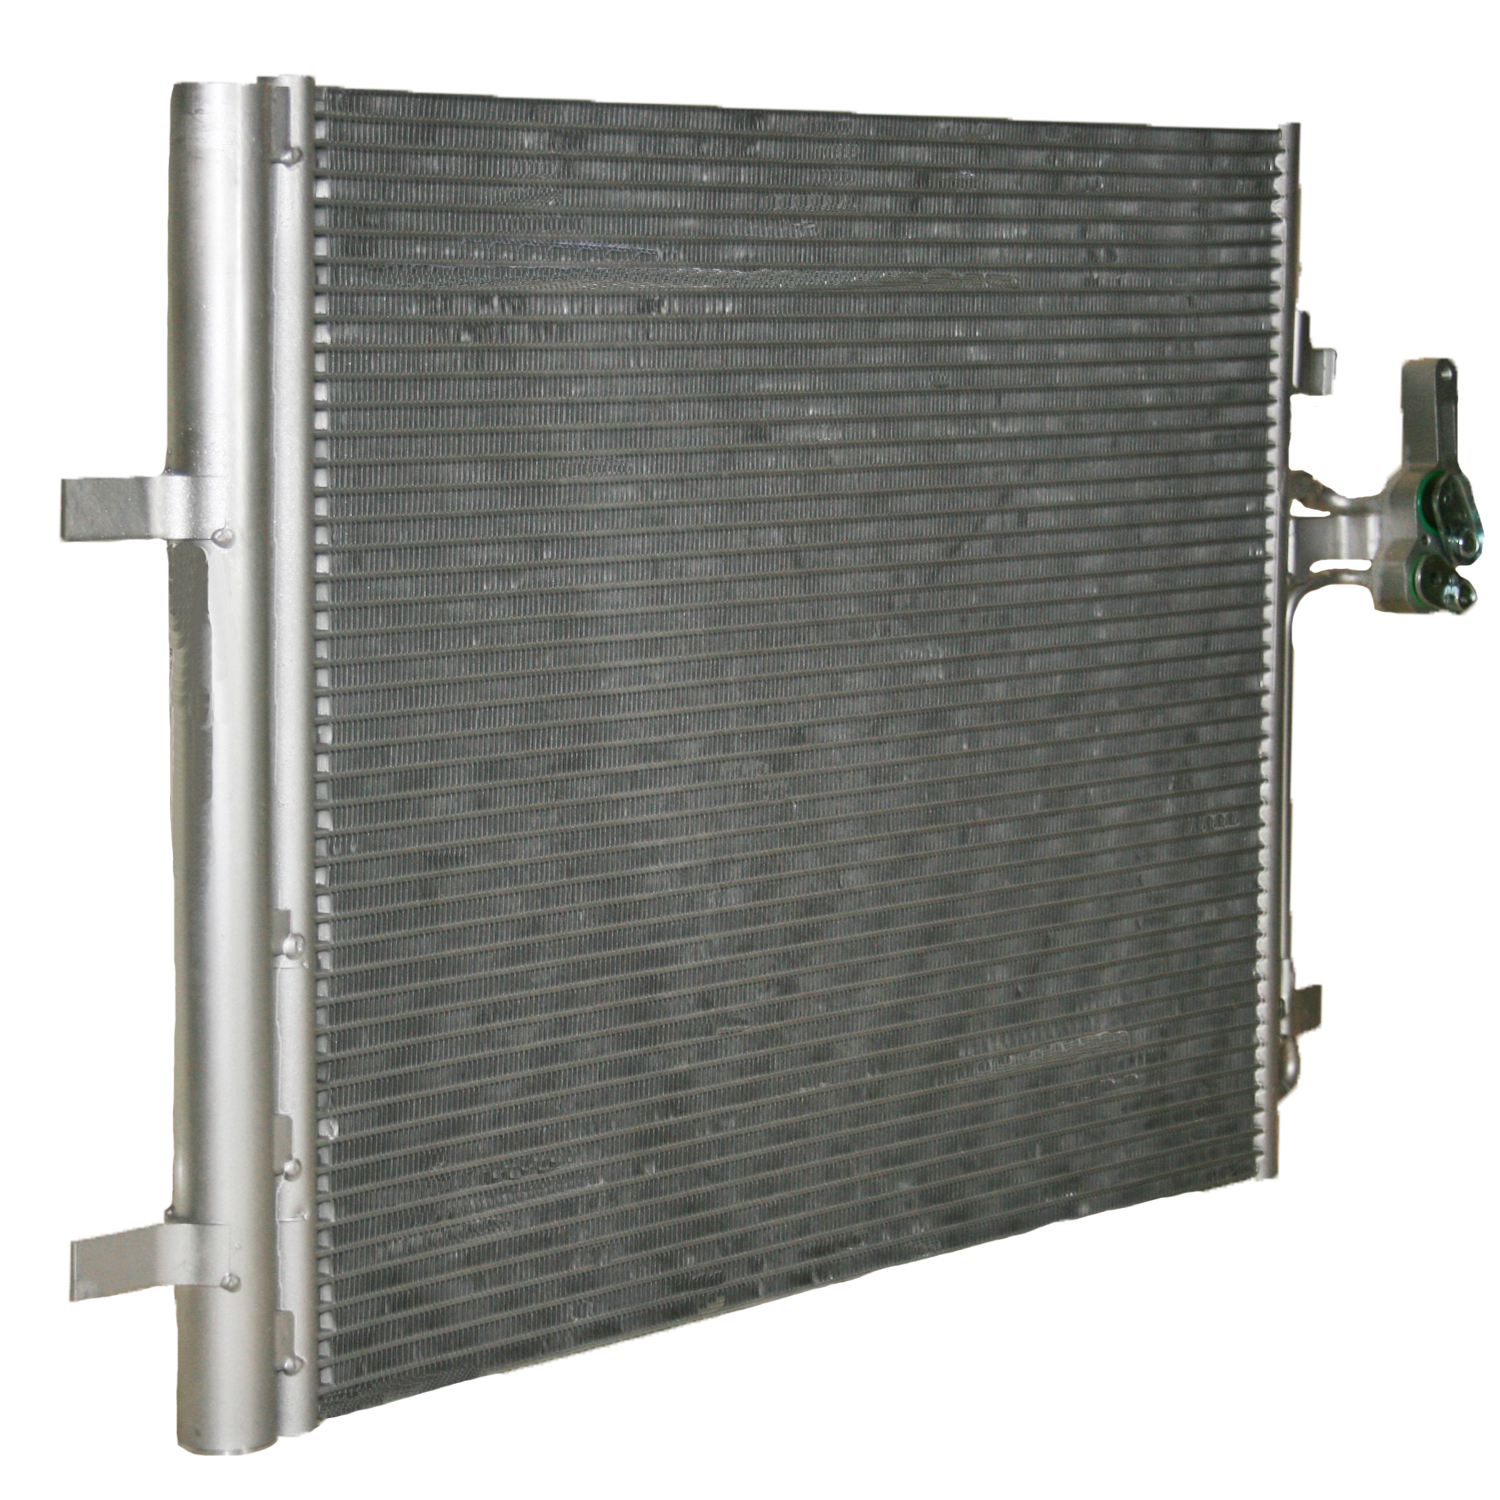 TCW Condenser 44-3733 New Product Image field_60b6a13a6e67c